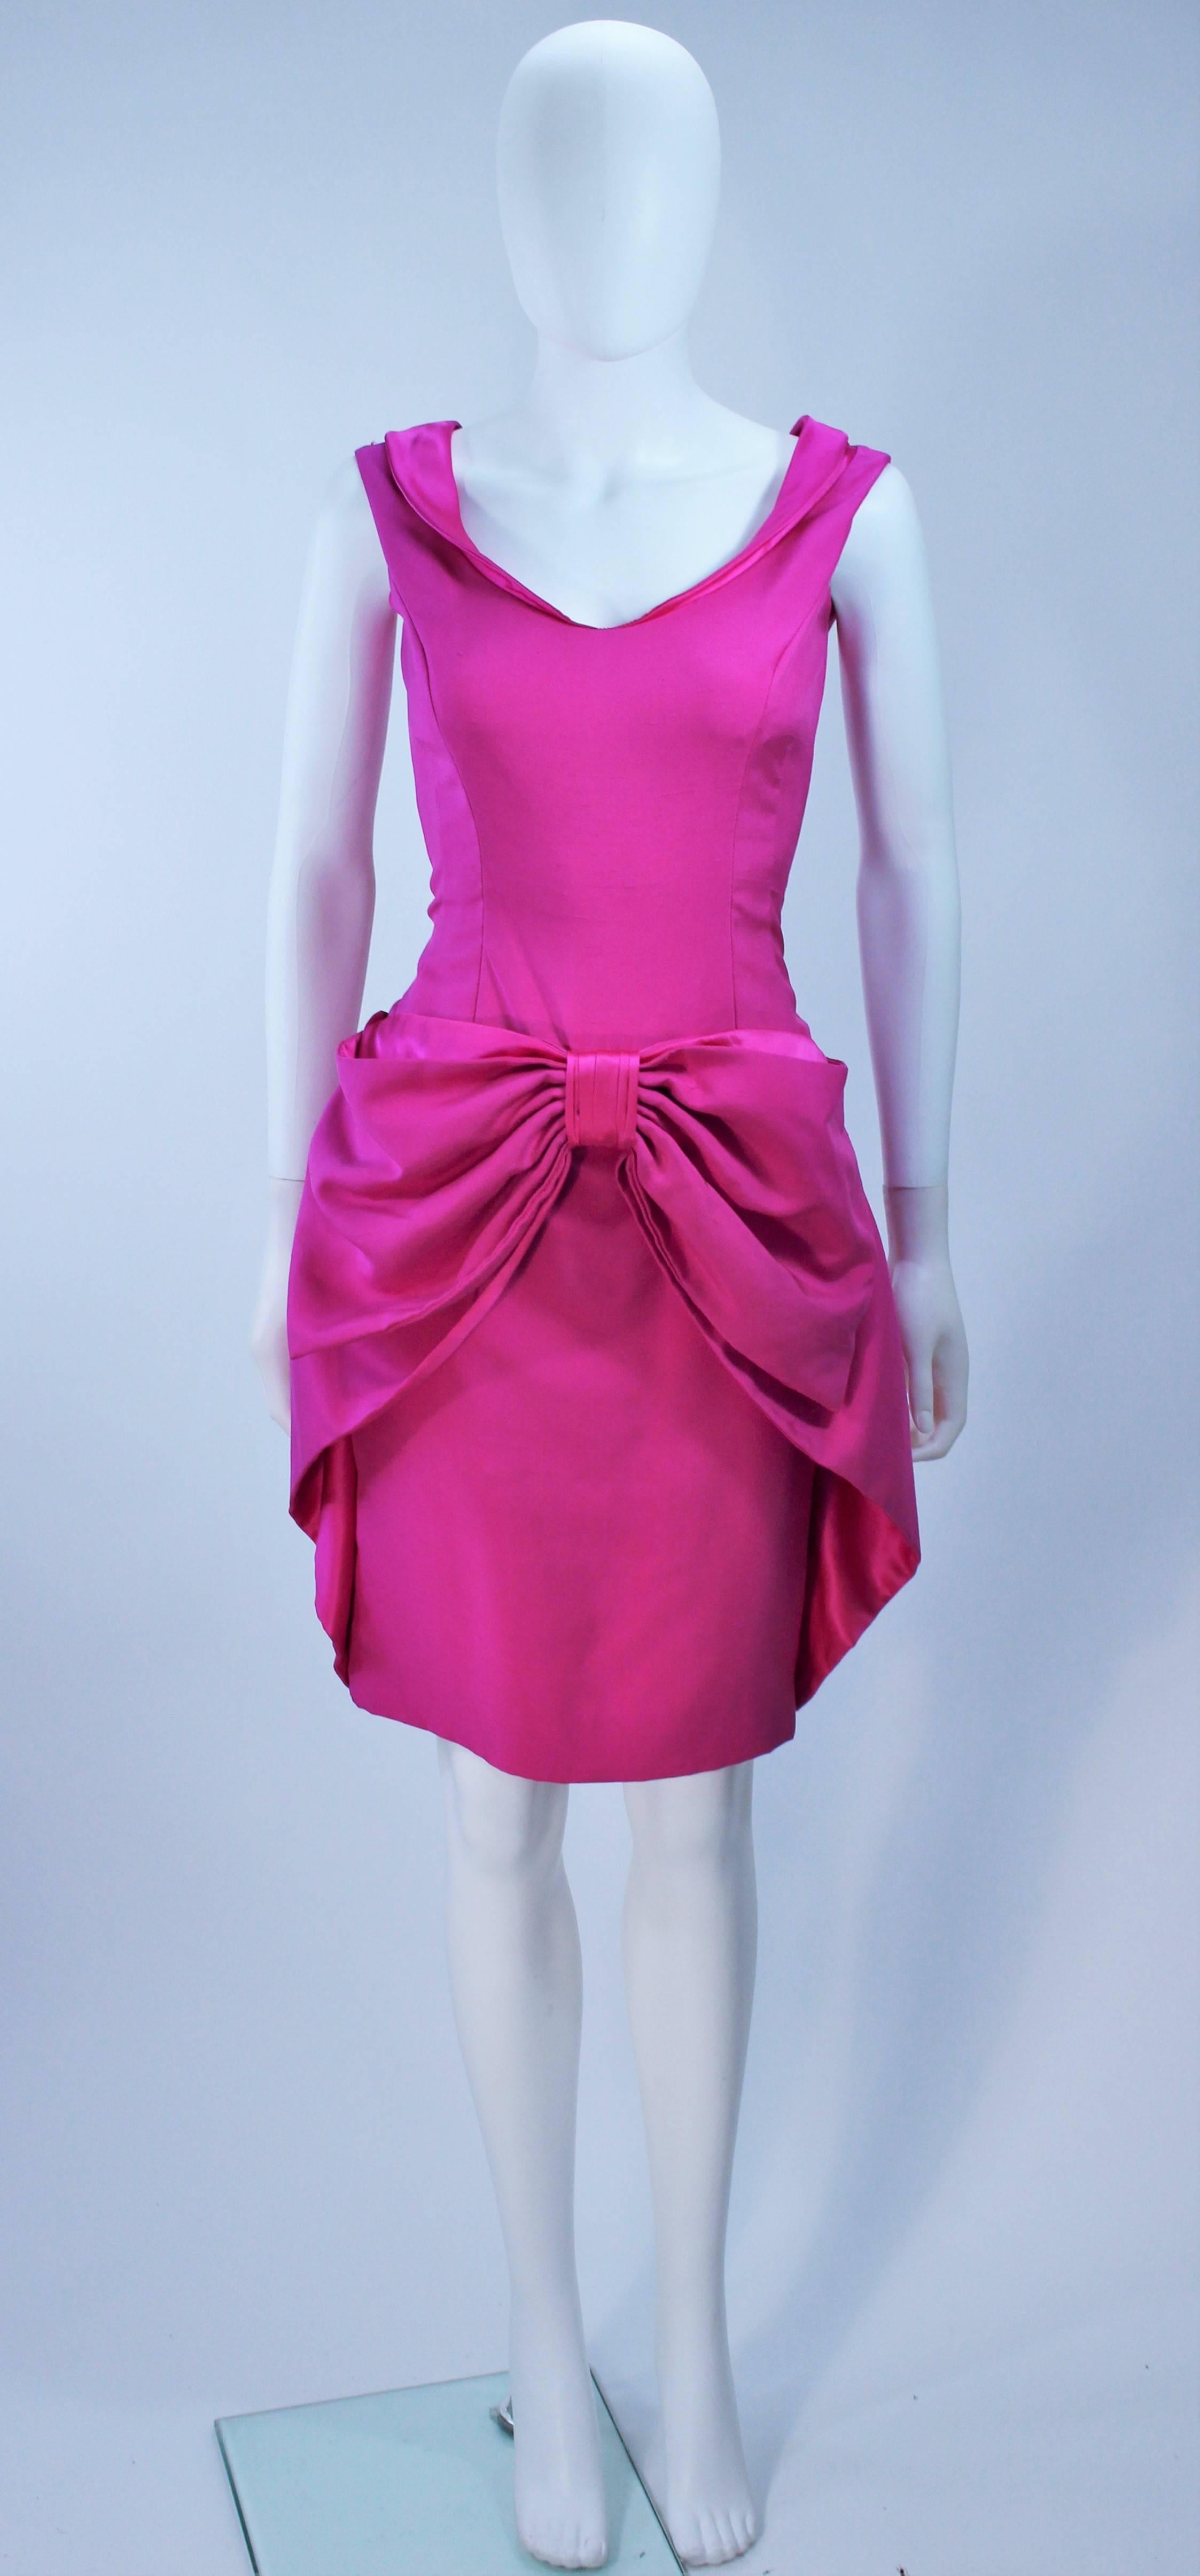 This Elizabeth Mason Couture pink silk dupioni sleeveless cocktail dress features a front draped bow with pockets. It is lined in silk satin and has a center back zipper. Made in Beverly Hills. 

This is a couture custom order. Please allow for a 60